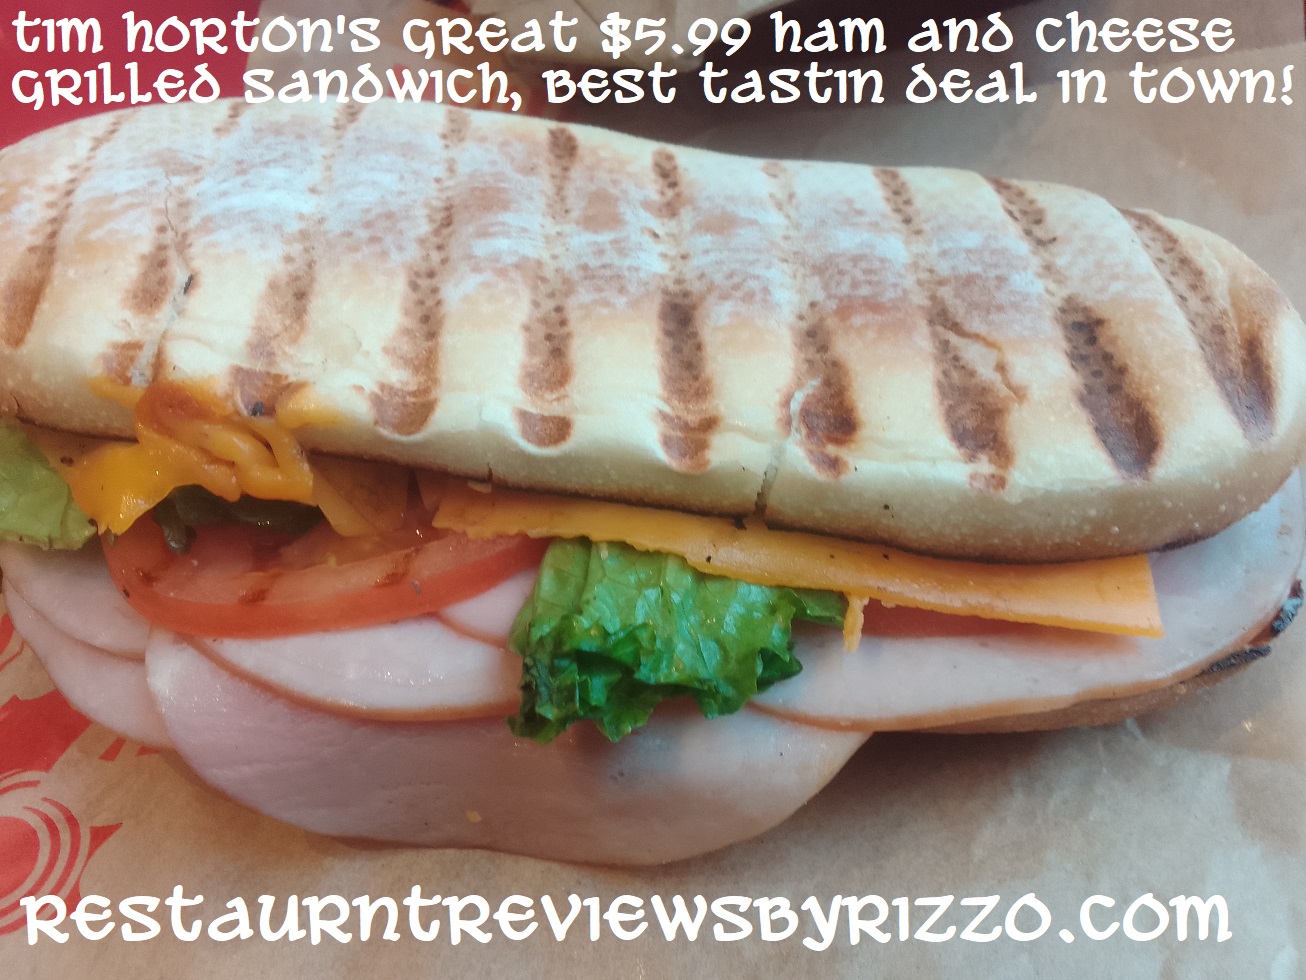 Tims famous Ham-cheddar sandwich (grilled)